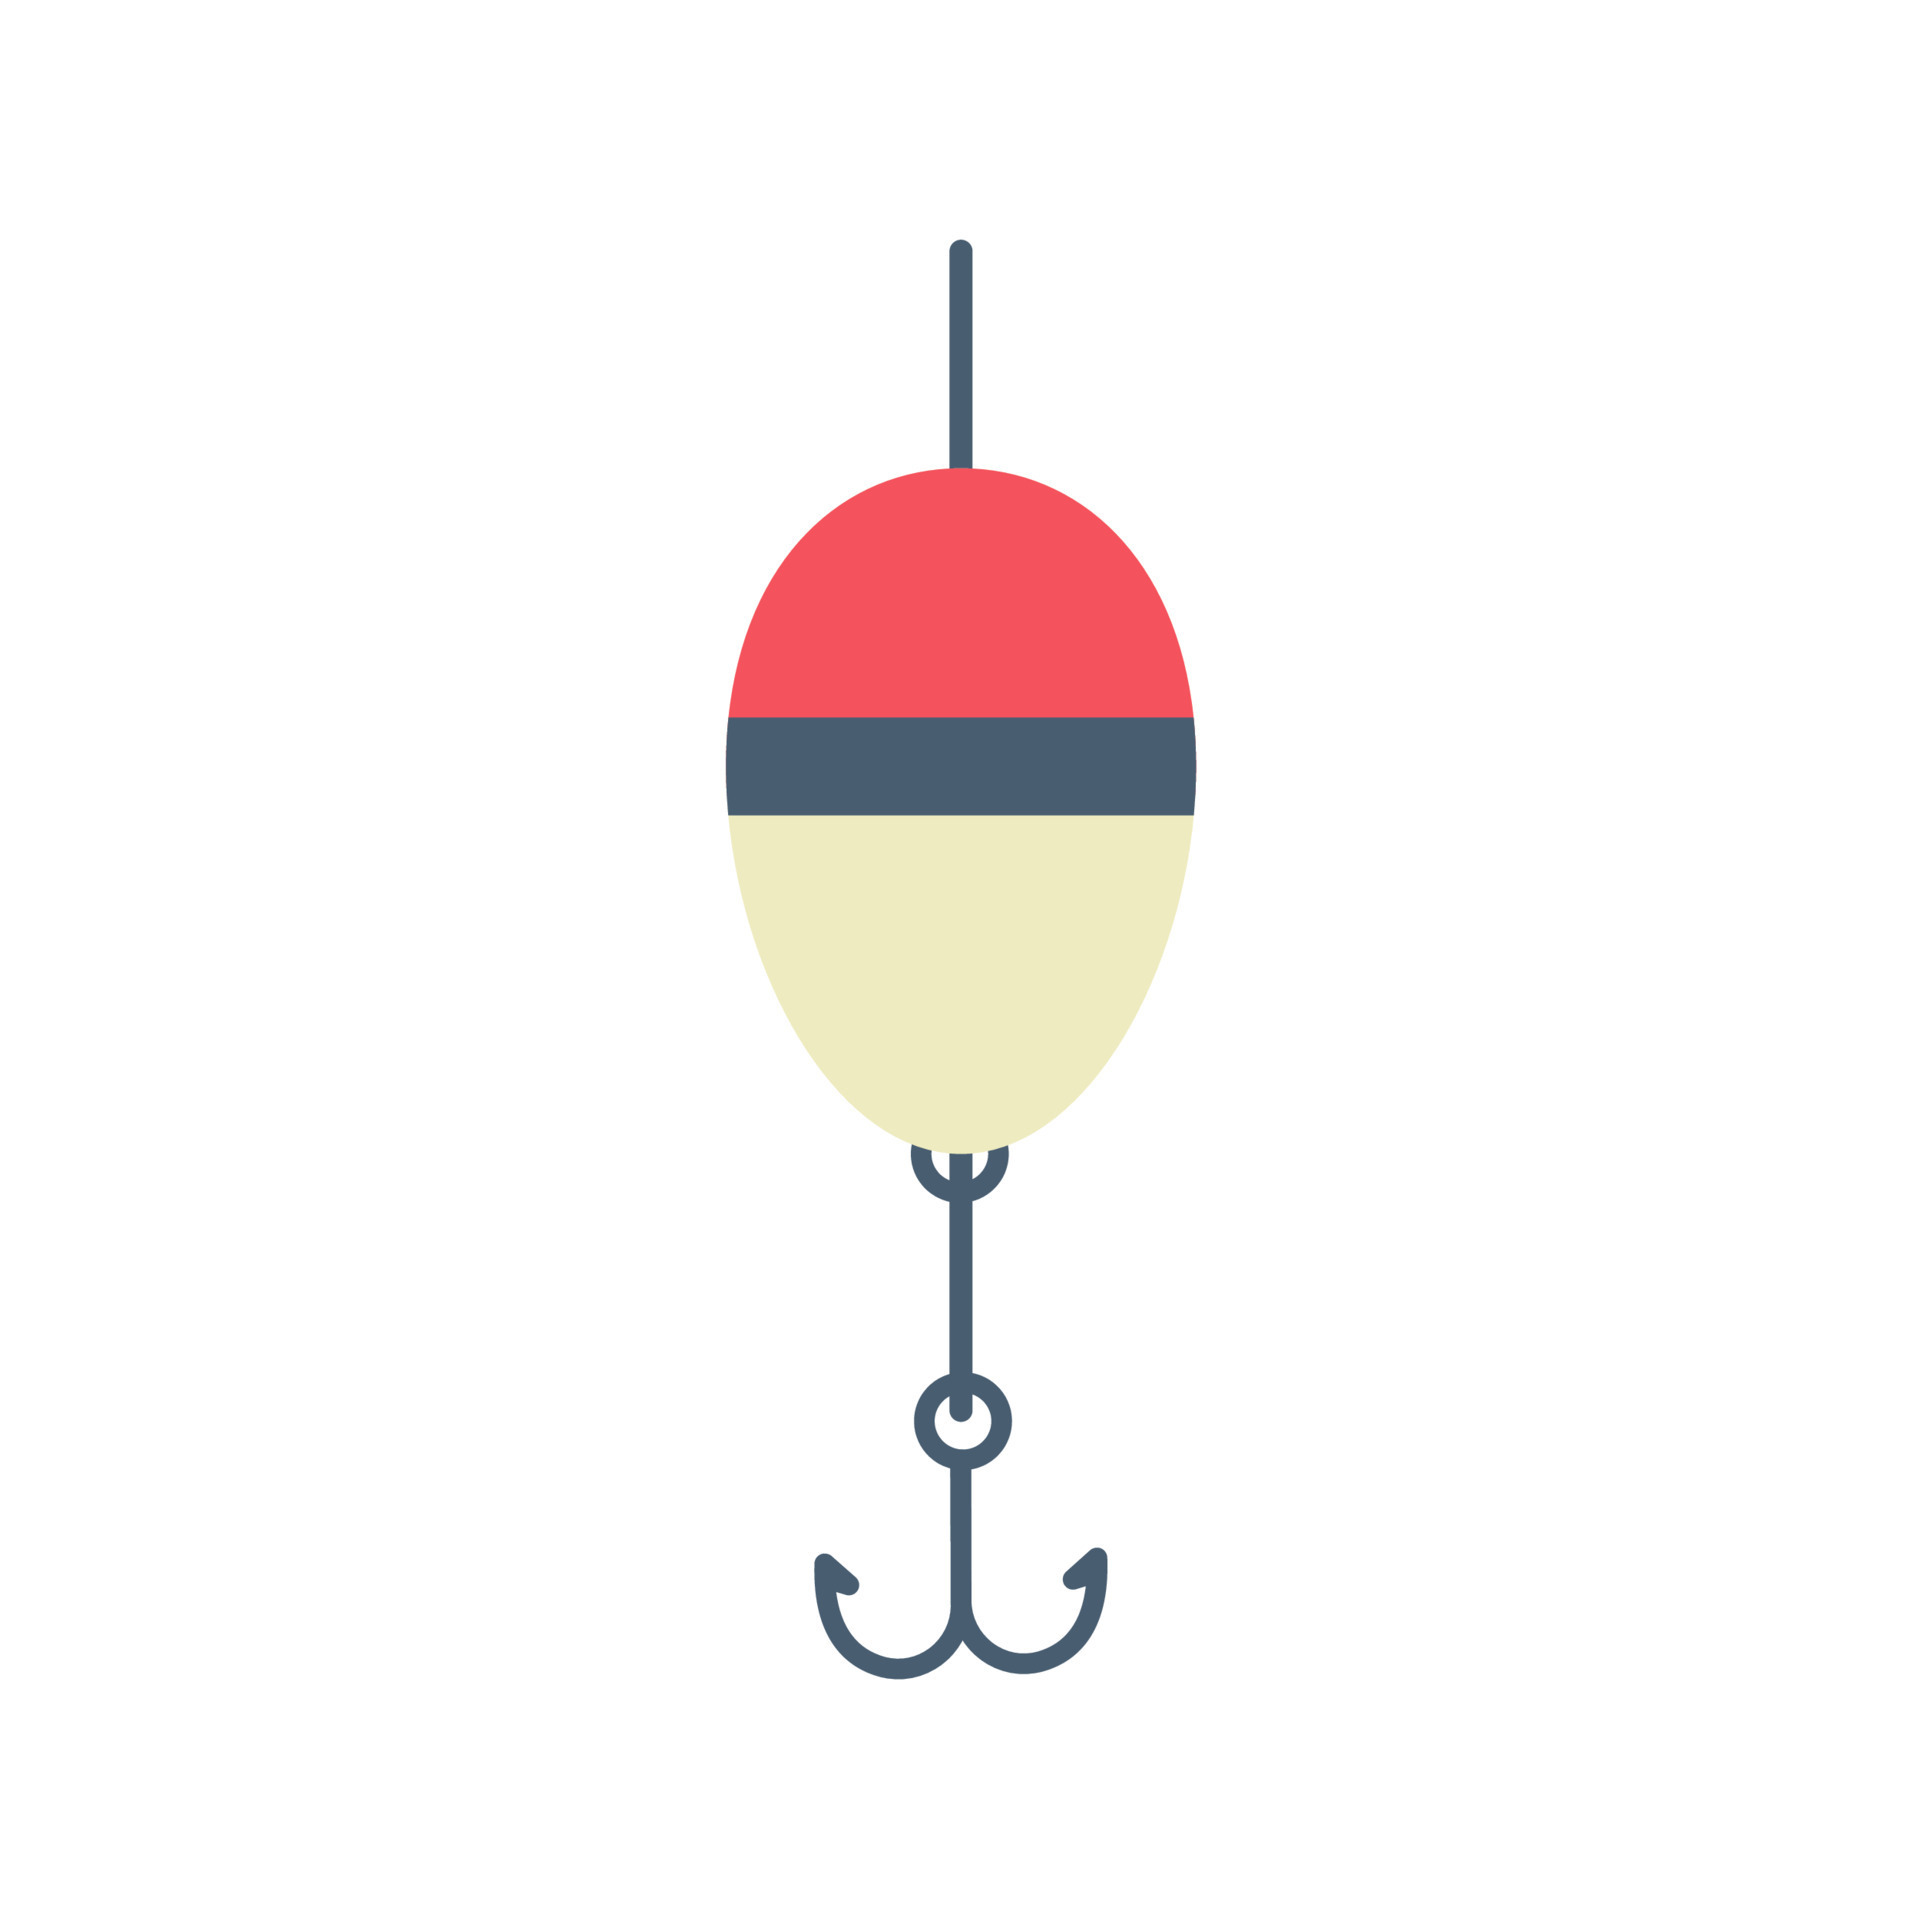 https://static.vecteezy.com/system/resources/previews/013/040/093/original/fishing-buoys-fishing-hooks-and-lures-for-anglers-vector.jpg